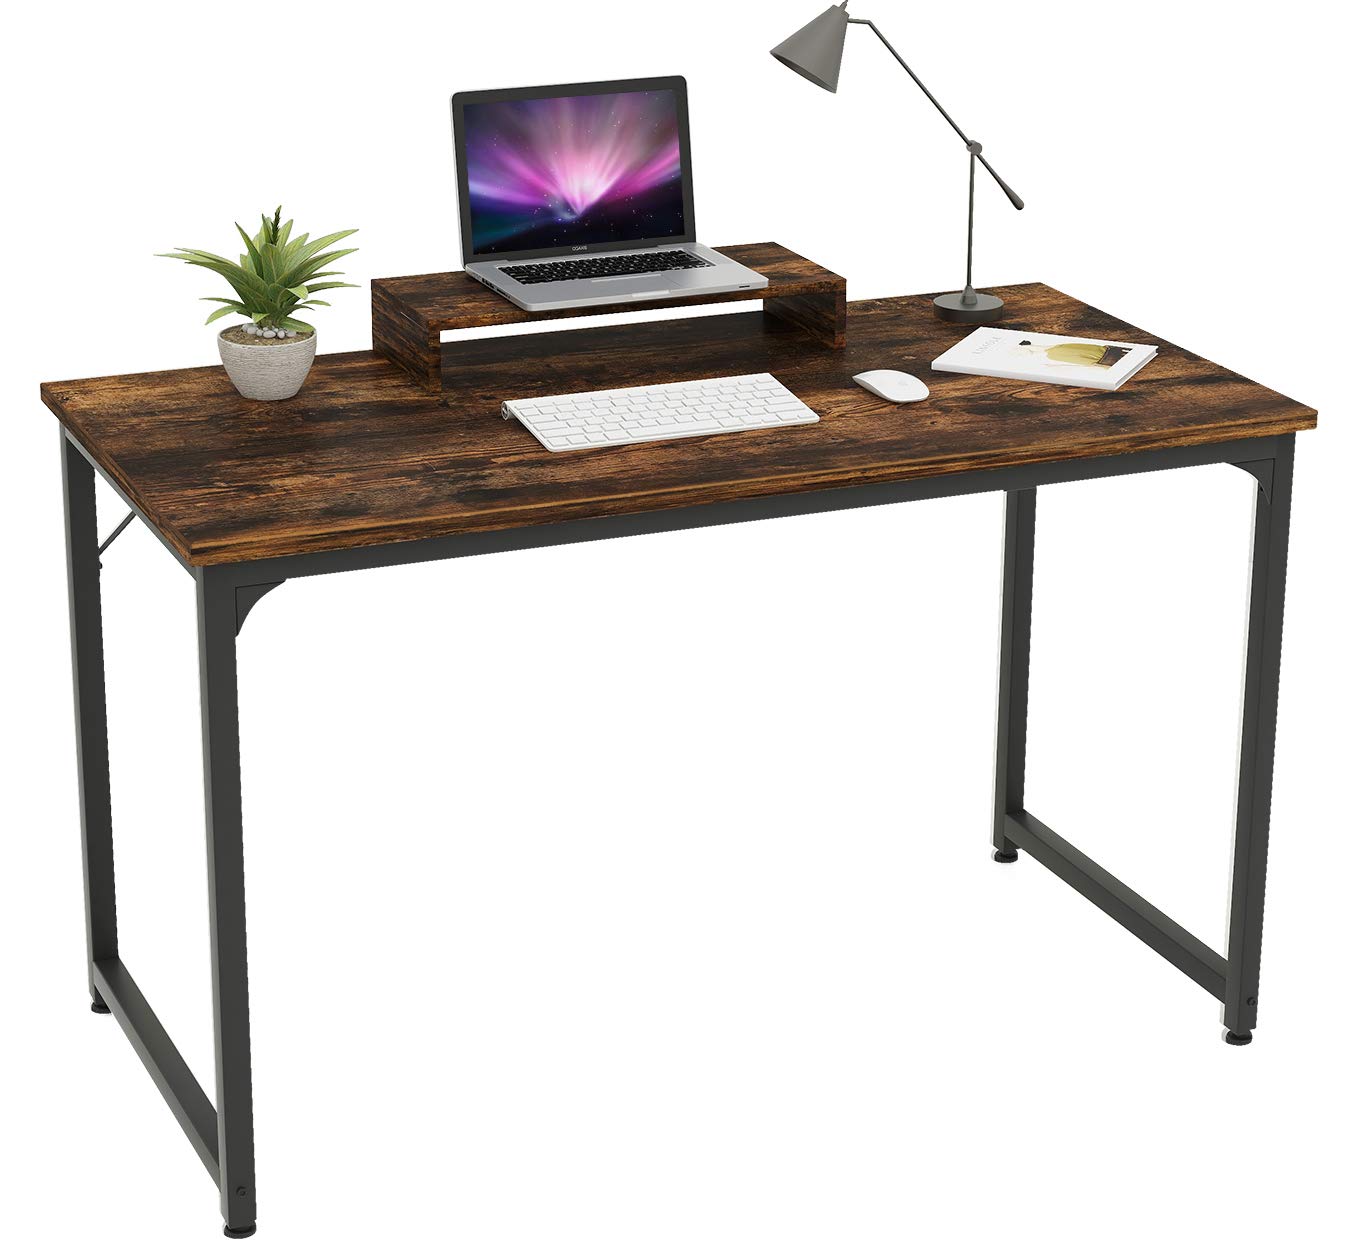 Mo.tools 47 Inch Computer Desk Sturdy Office Desks with Monitor Stand, Laptop Notebook Study Writing Table for Home Office, Workstation, Bedroom,Vintage Brown